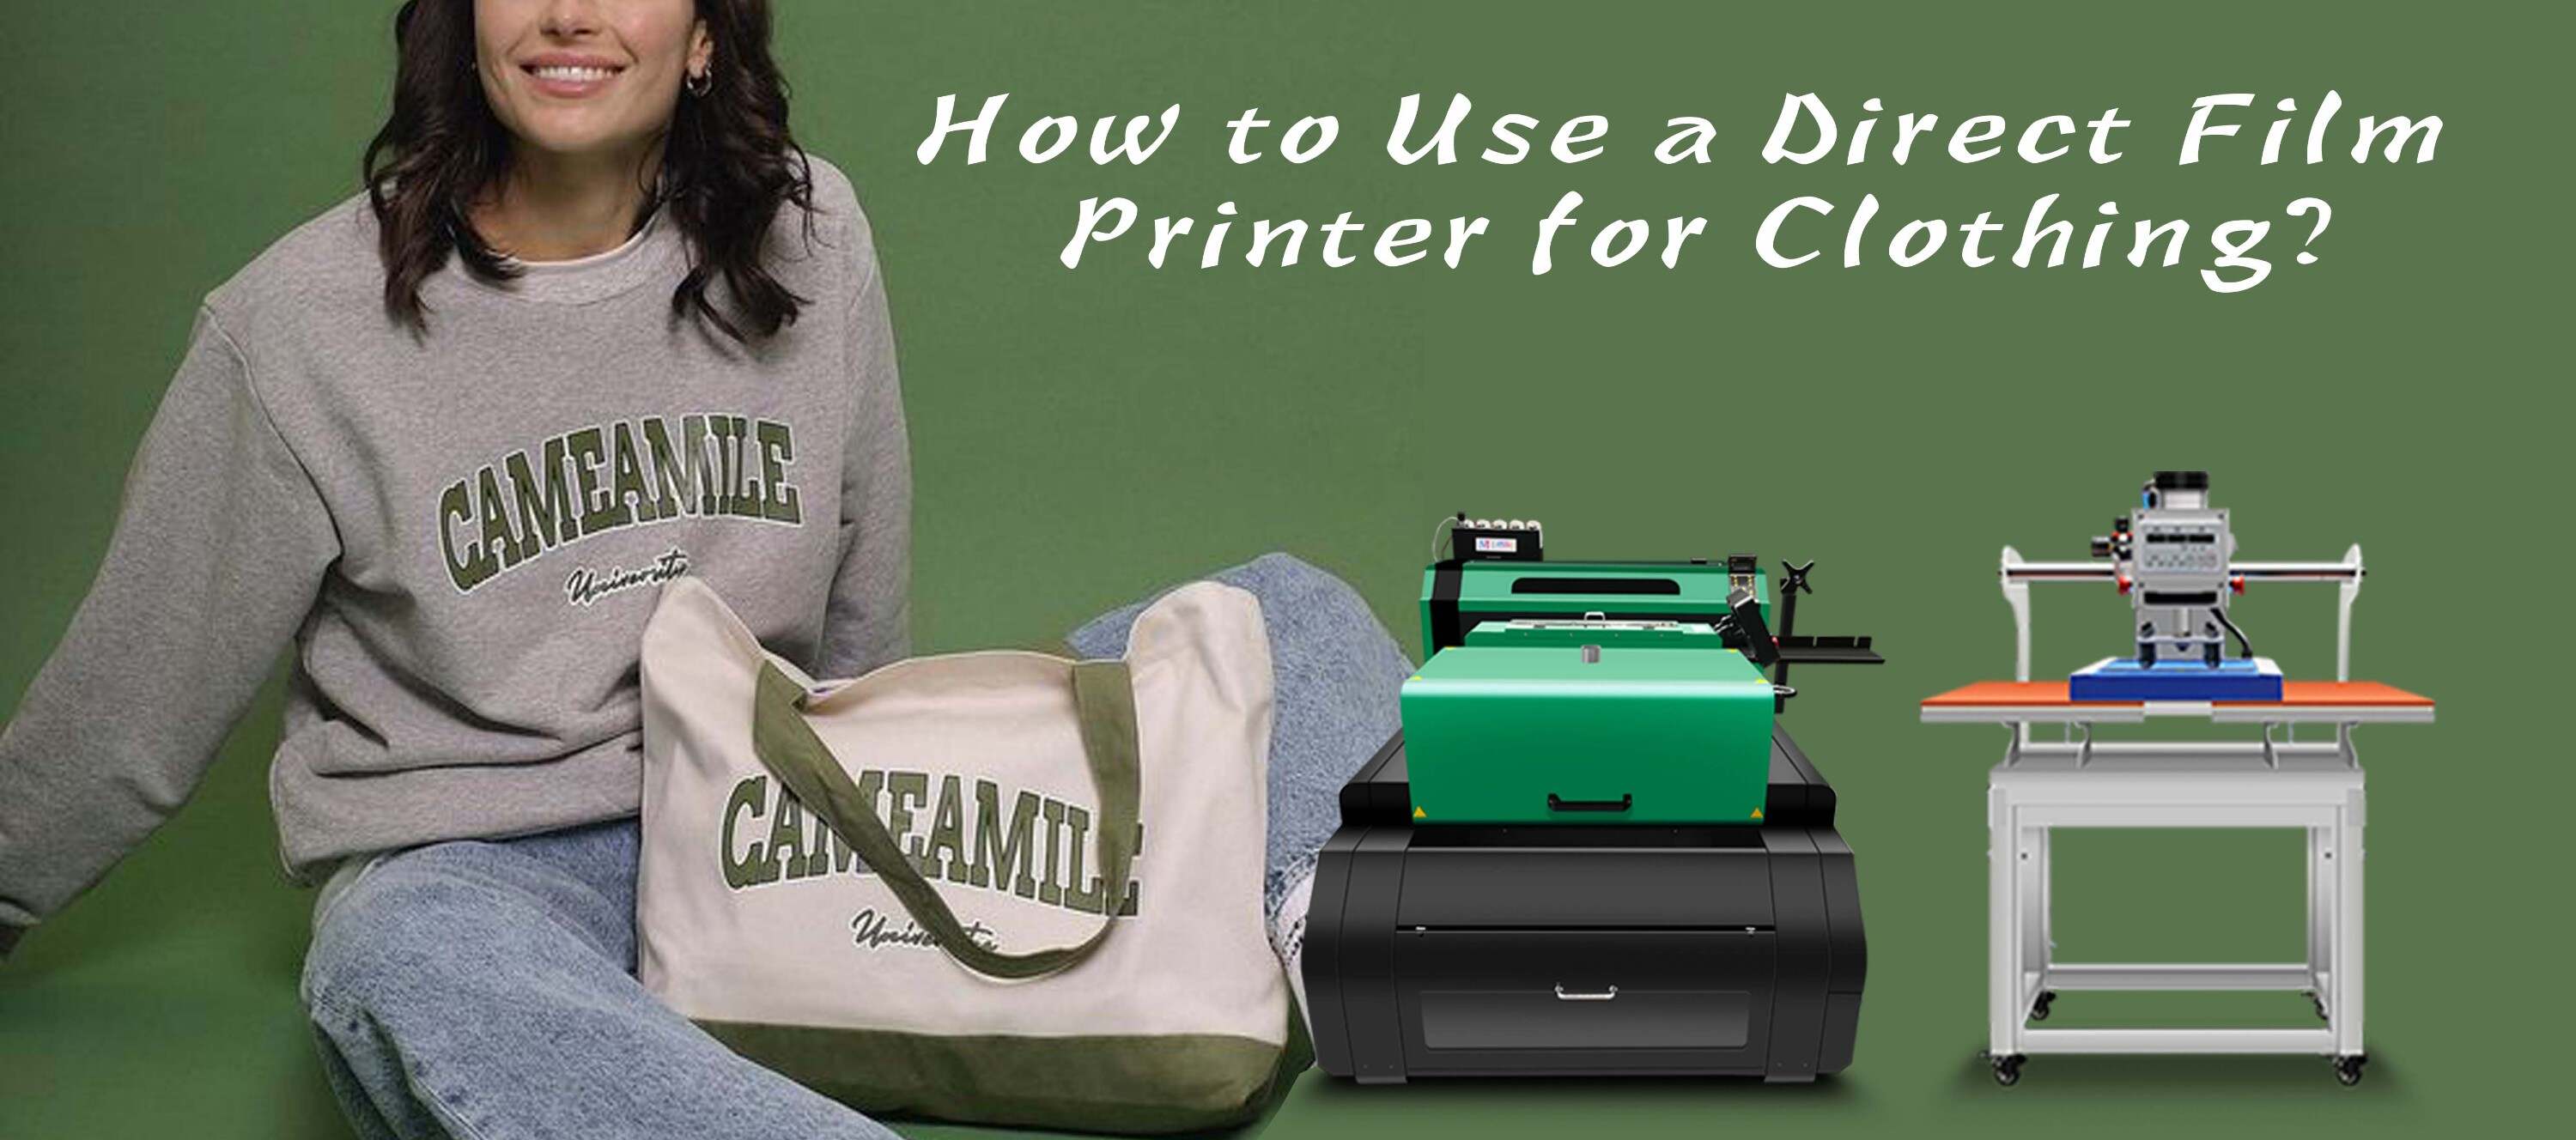 How to Use a Direct Film Printer for Clothing_